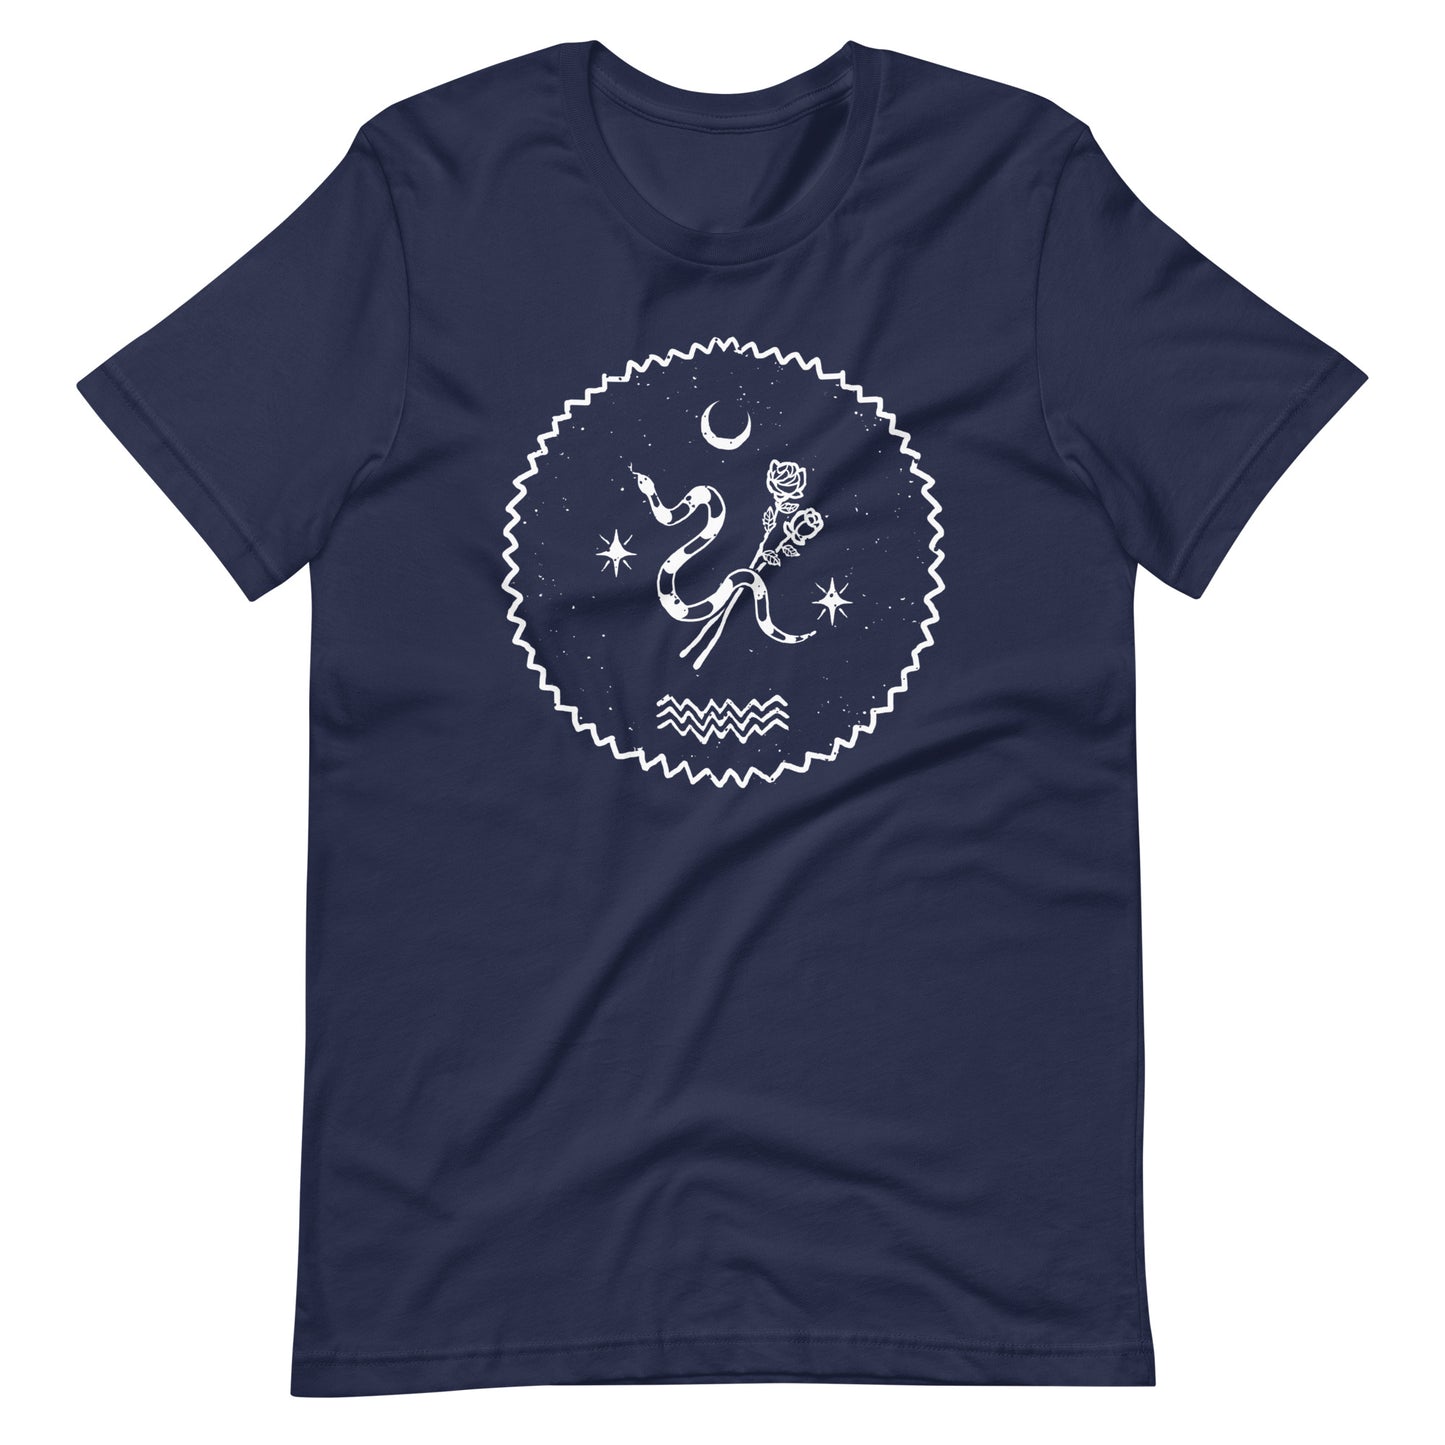 Scented Poison - Men's t-shirt - Navy Front